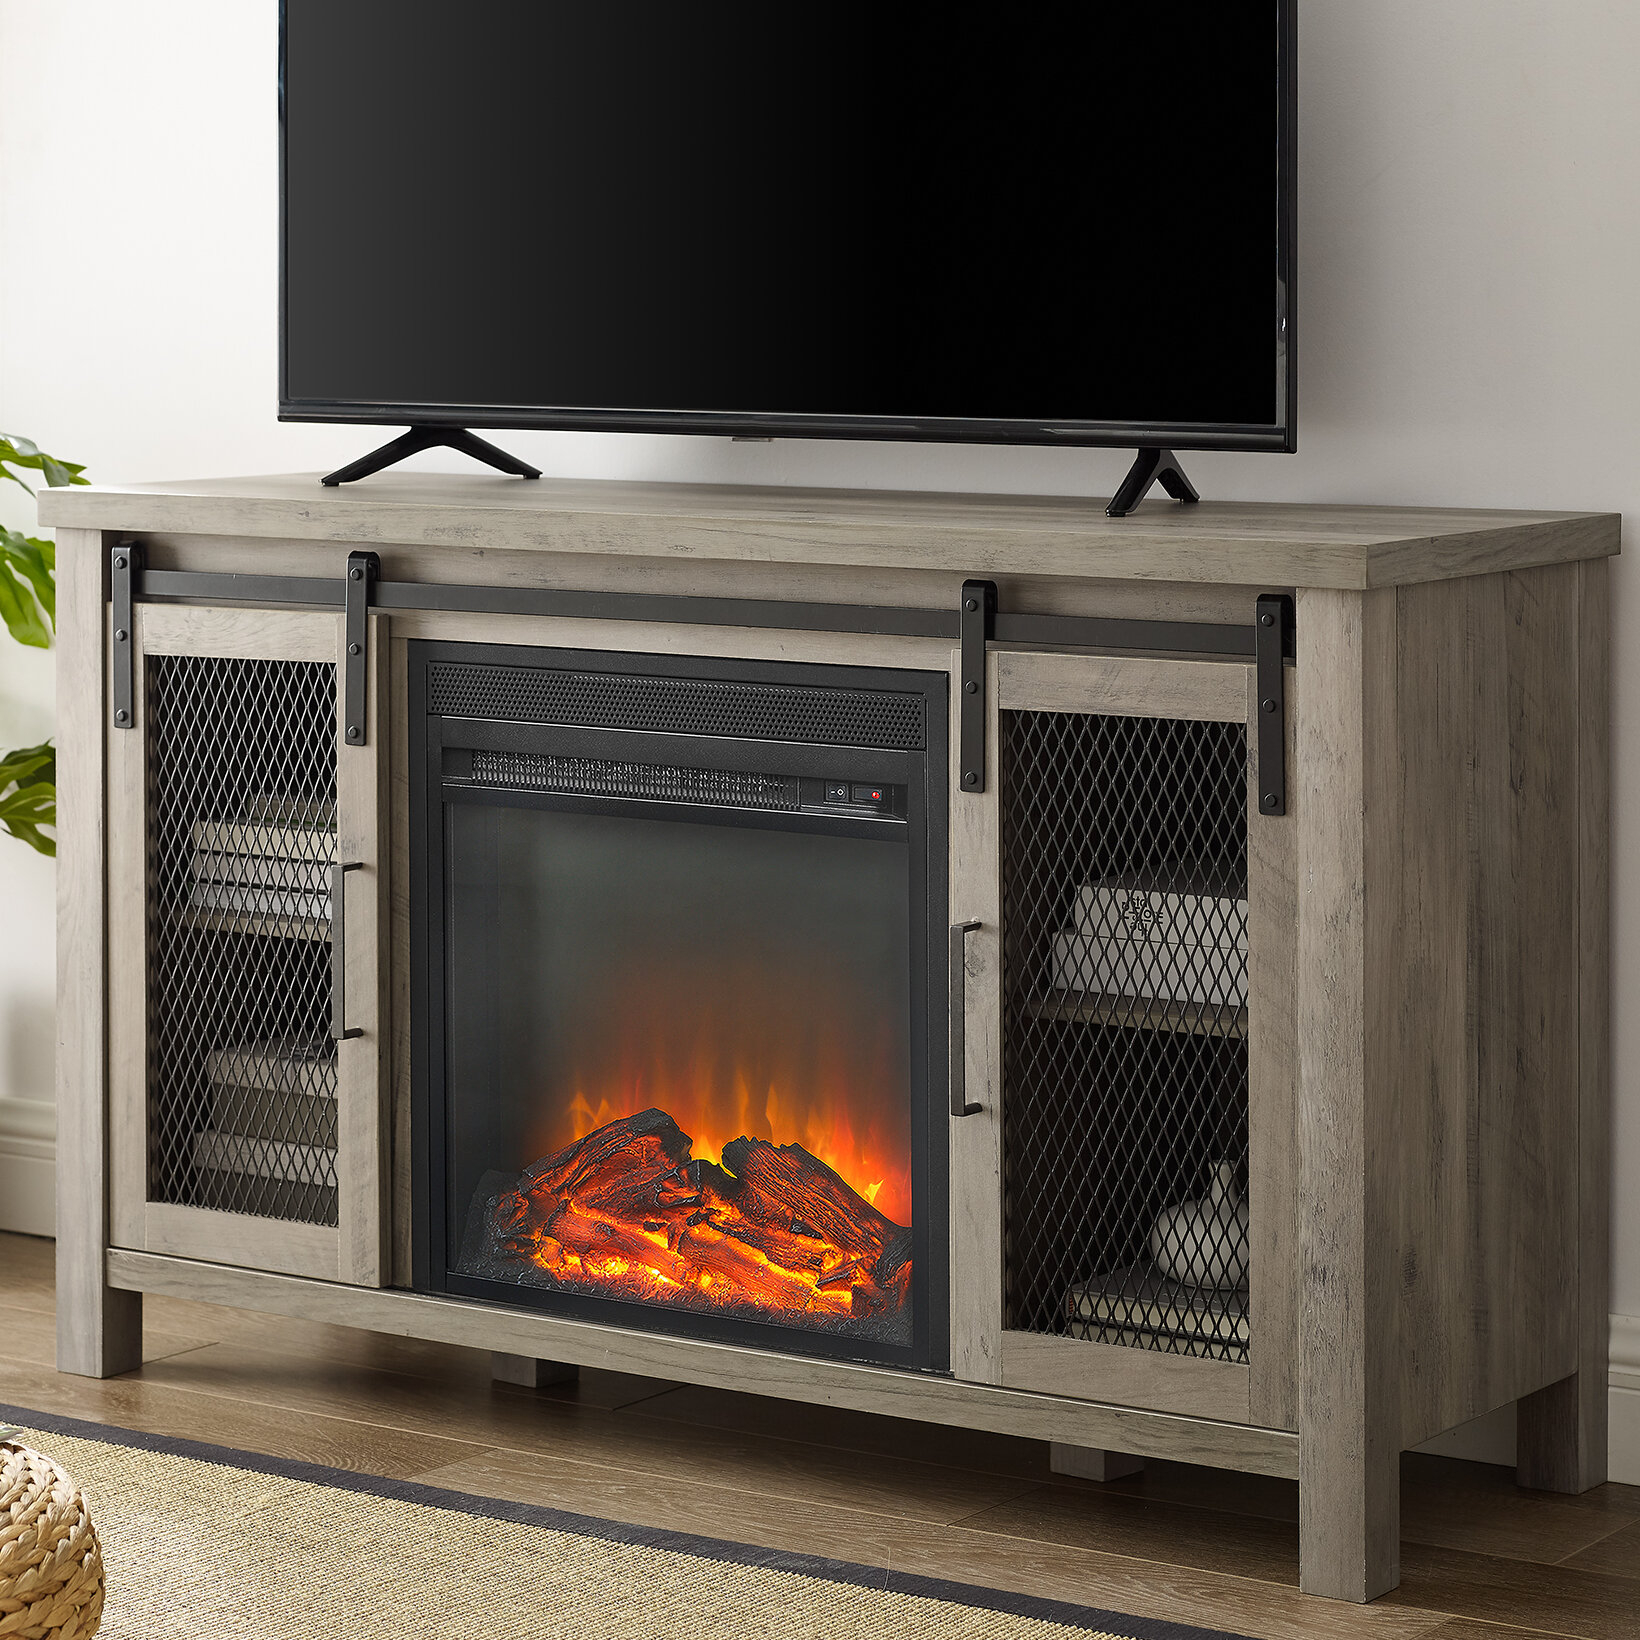 Mahan TV Stand for TVs up to 55" with Fireplace Included